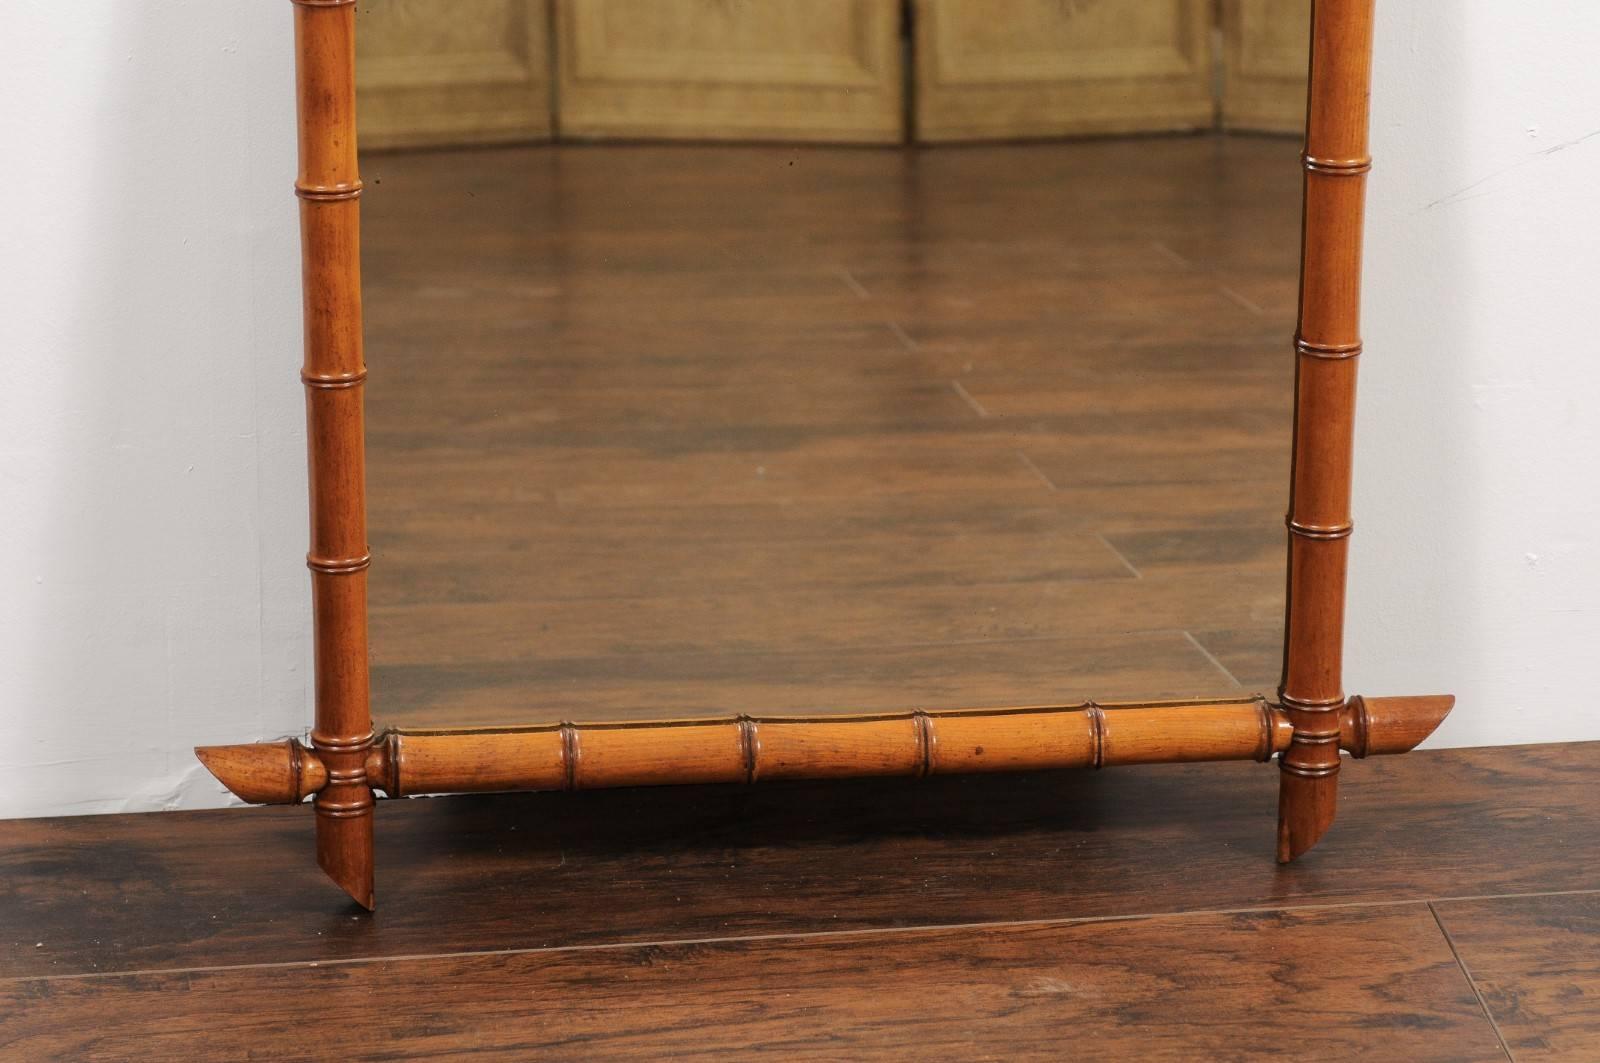 20th Century French Faux-Bamboo Rectangular Mirror, circa 1930 with Honey Color